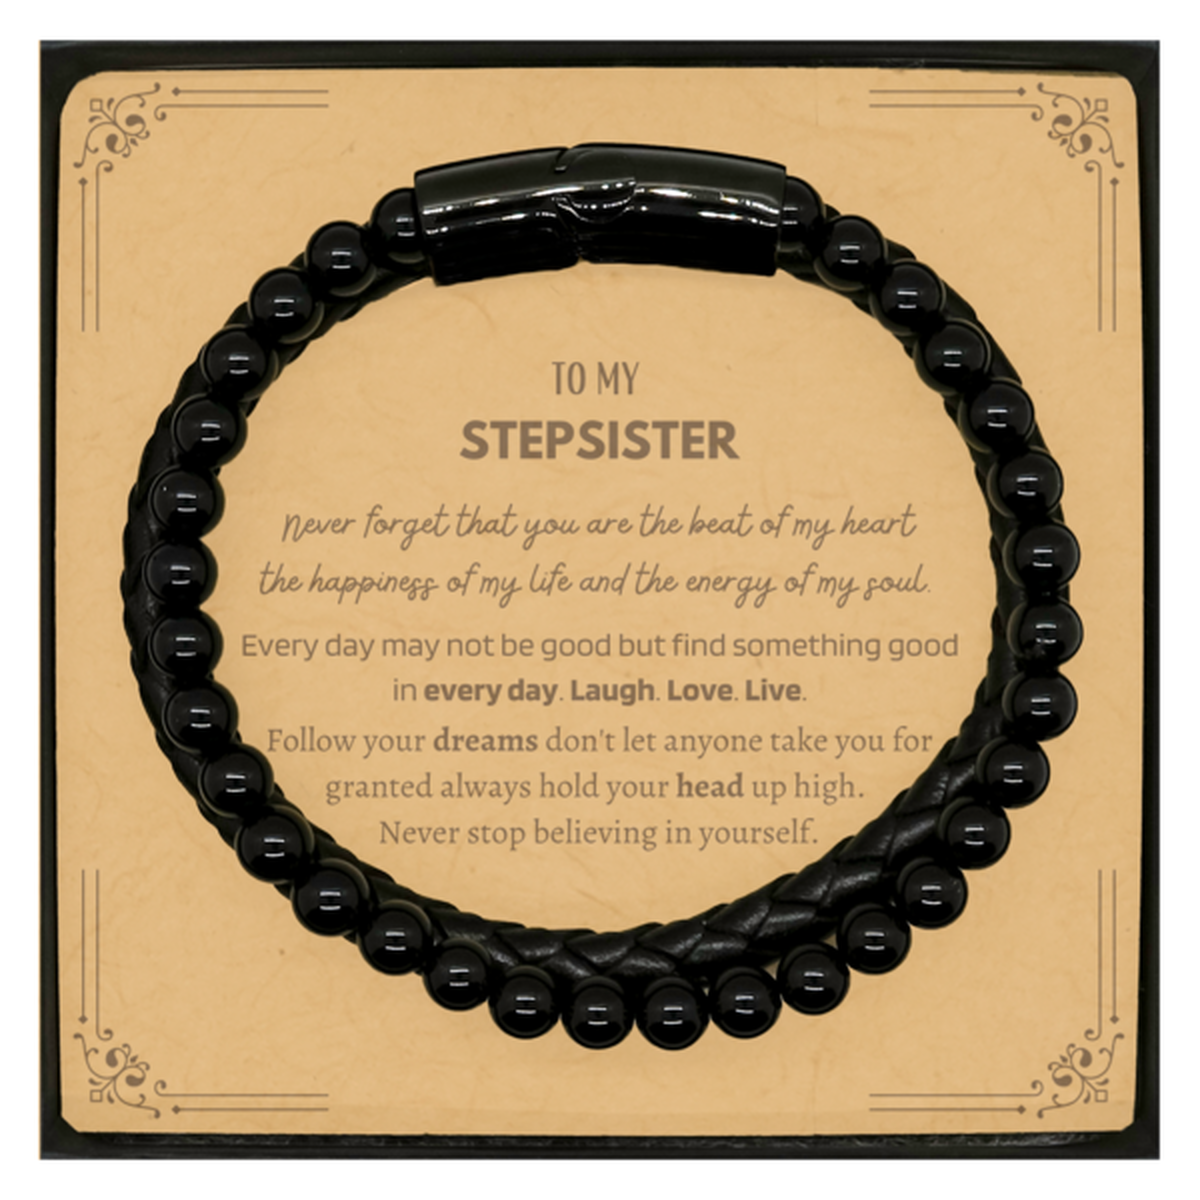 To My Stepsister Message Card Gifts, Christmas Stepsister Stone Leather Bracelets Present, Birthday Unique Motivational For Stepsister, To My Stepsister Never forget that you are the beat of my heart the happiness of my life and the energy of my soul